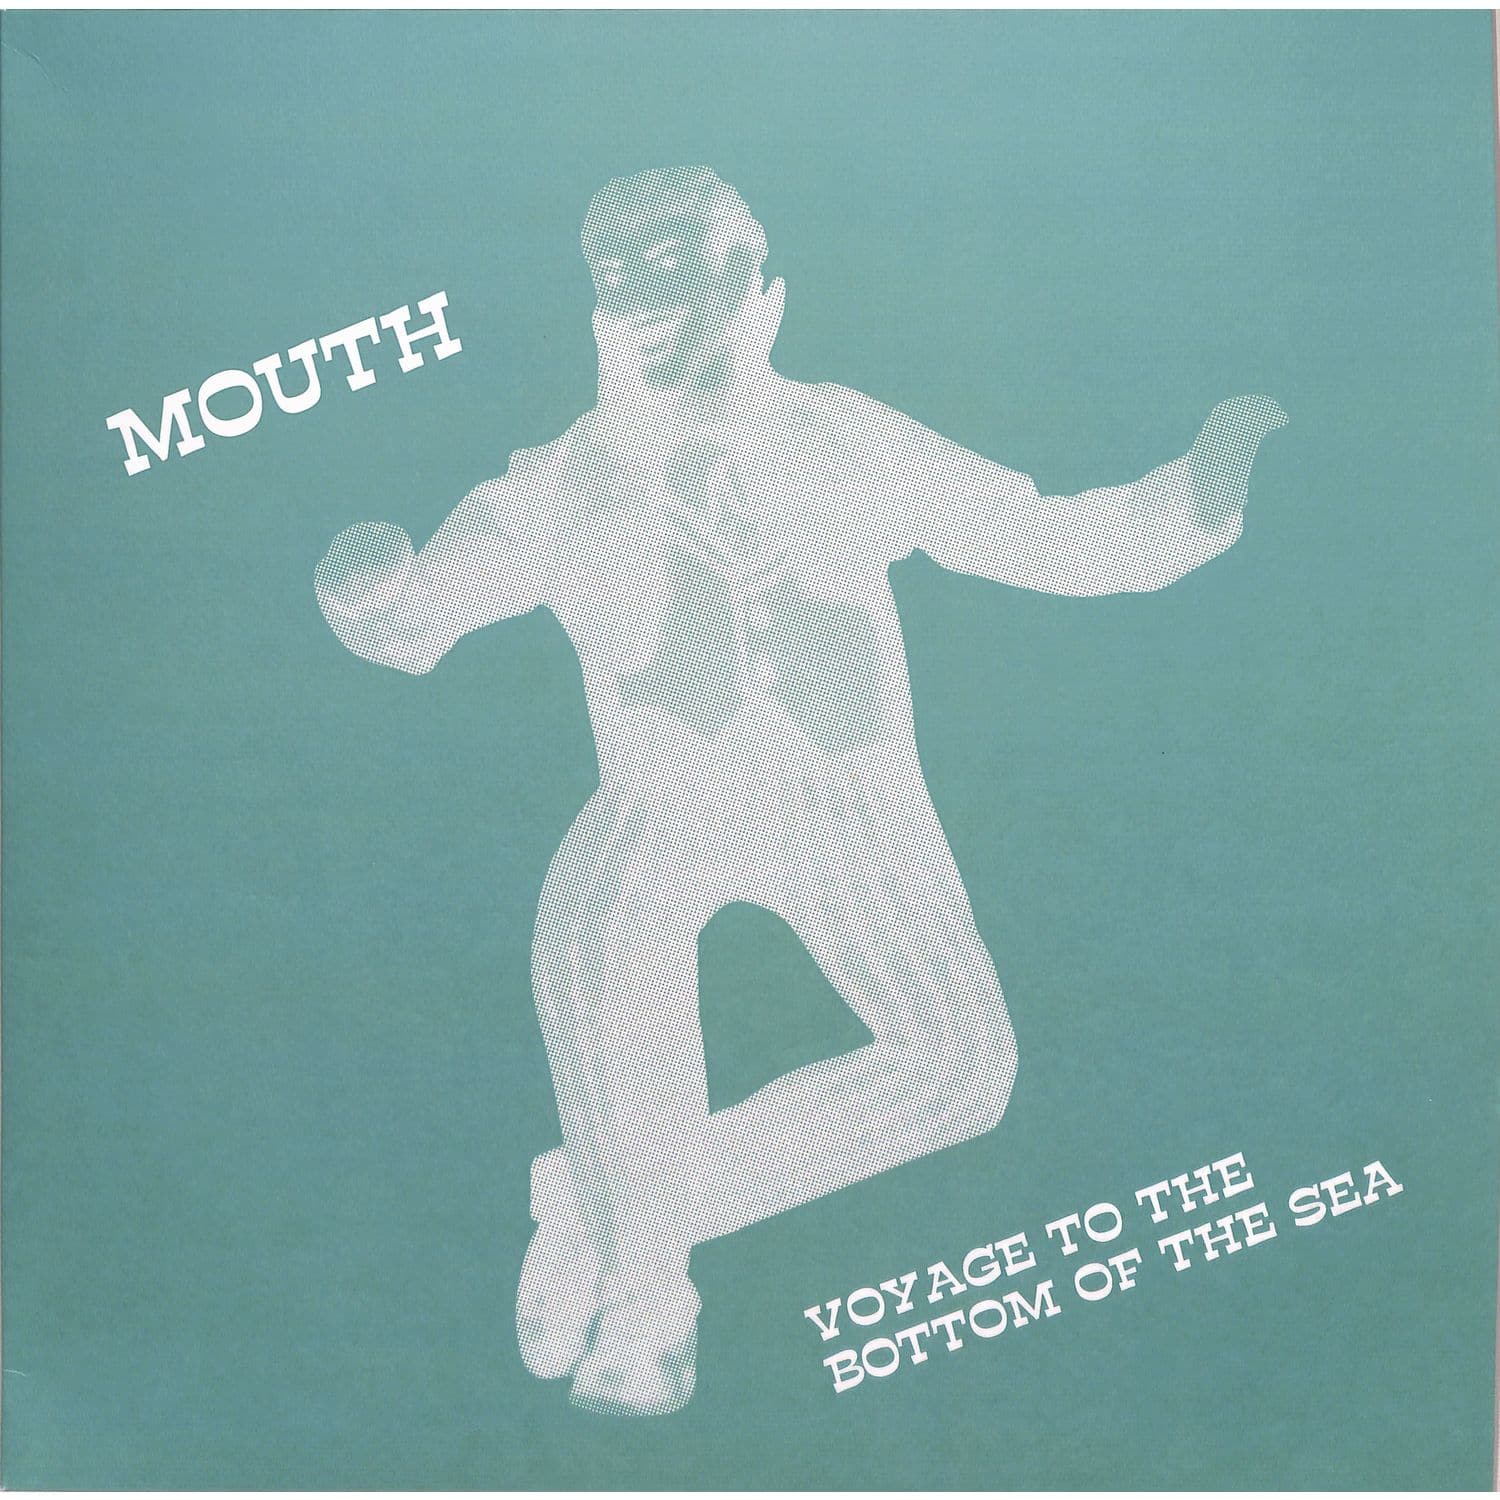 Mouth - VOYAGE TO THE BOTTOM OF THE SEA 